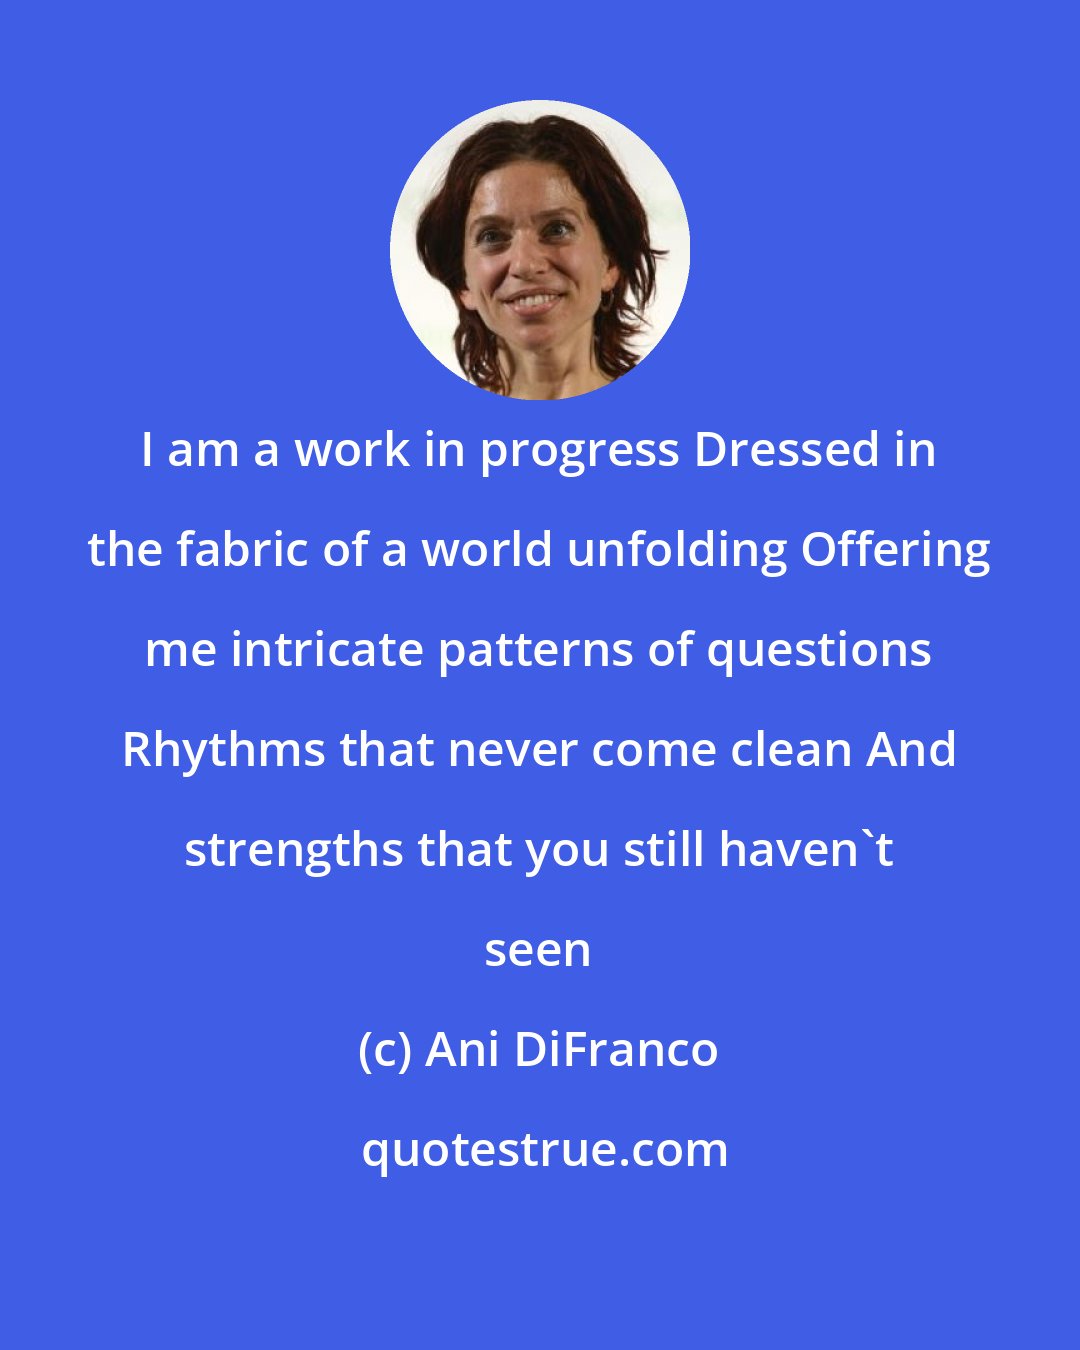 Ani DiFranco: I am a work in progress Dressed in the fabric of a world unfolding Offering me intricate patterns of questions Rhythms that never come clean And strengths that you still haven't seen